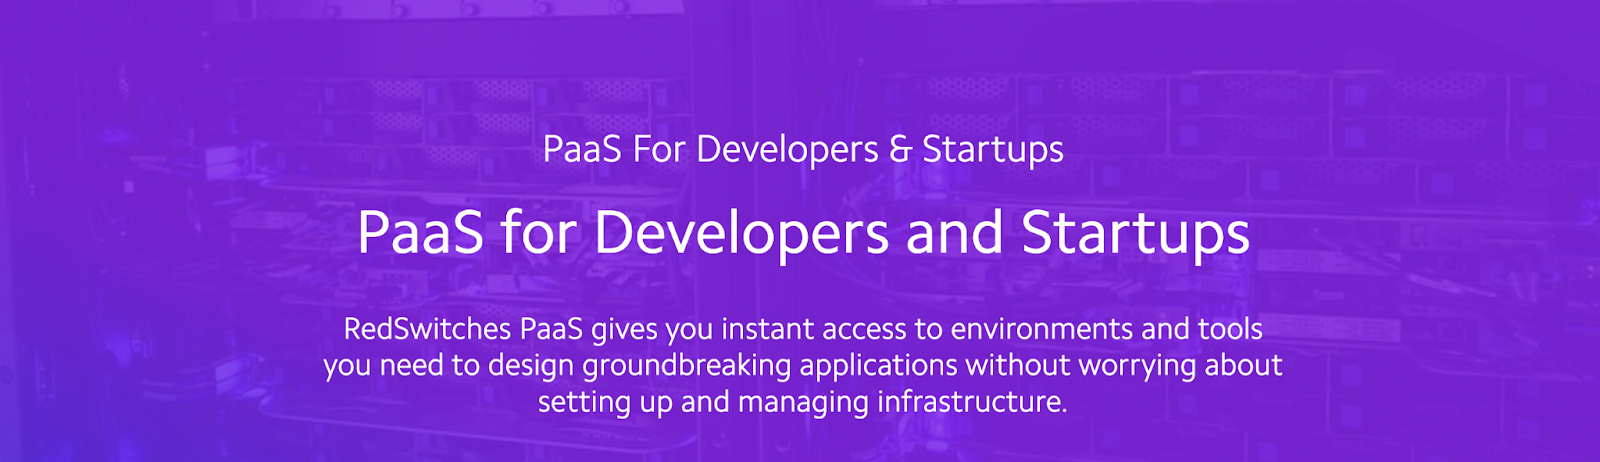 PaaS for Developers